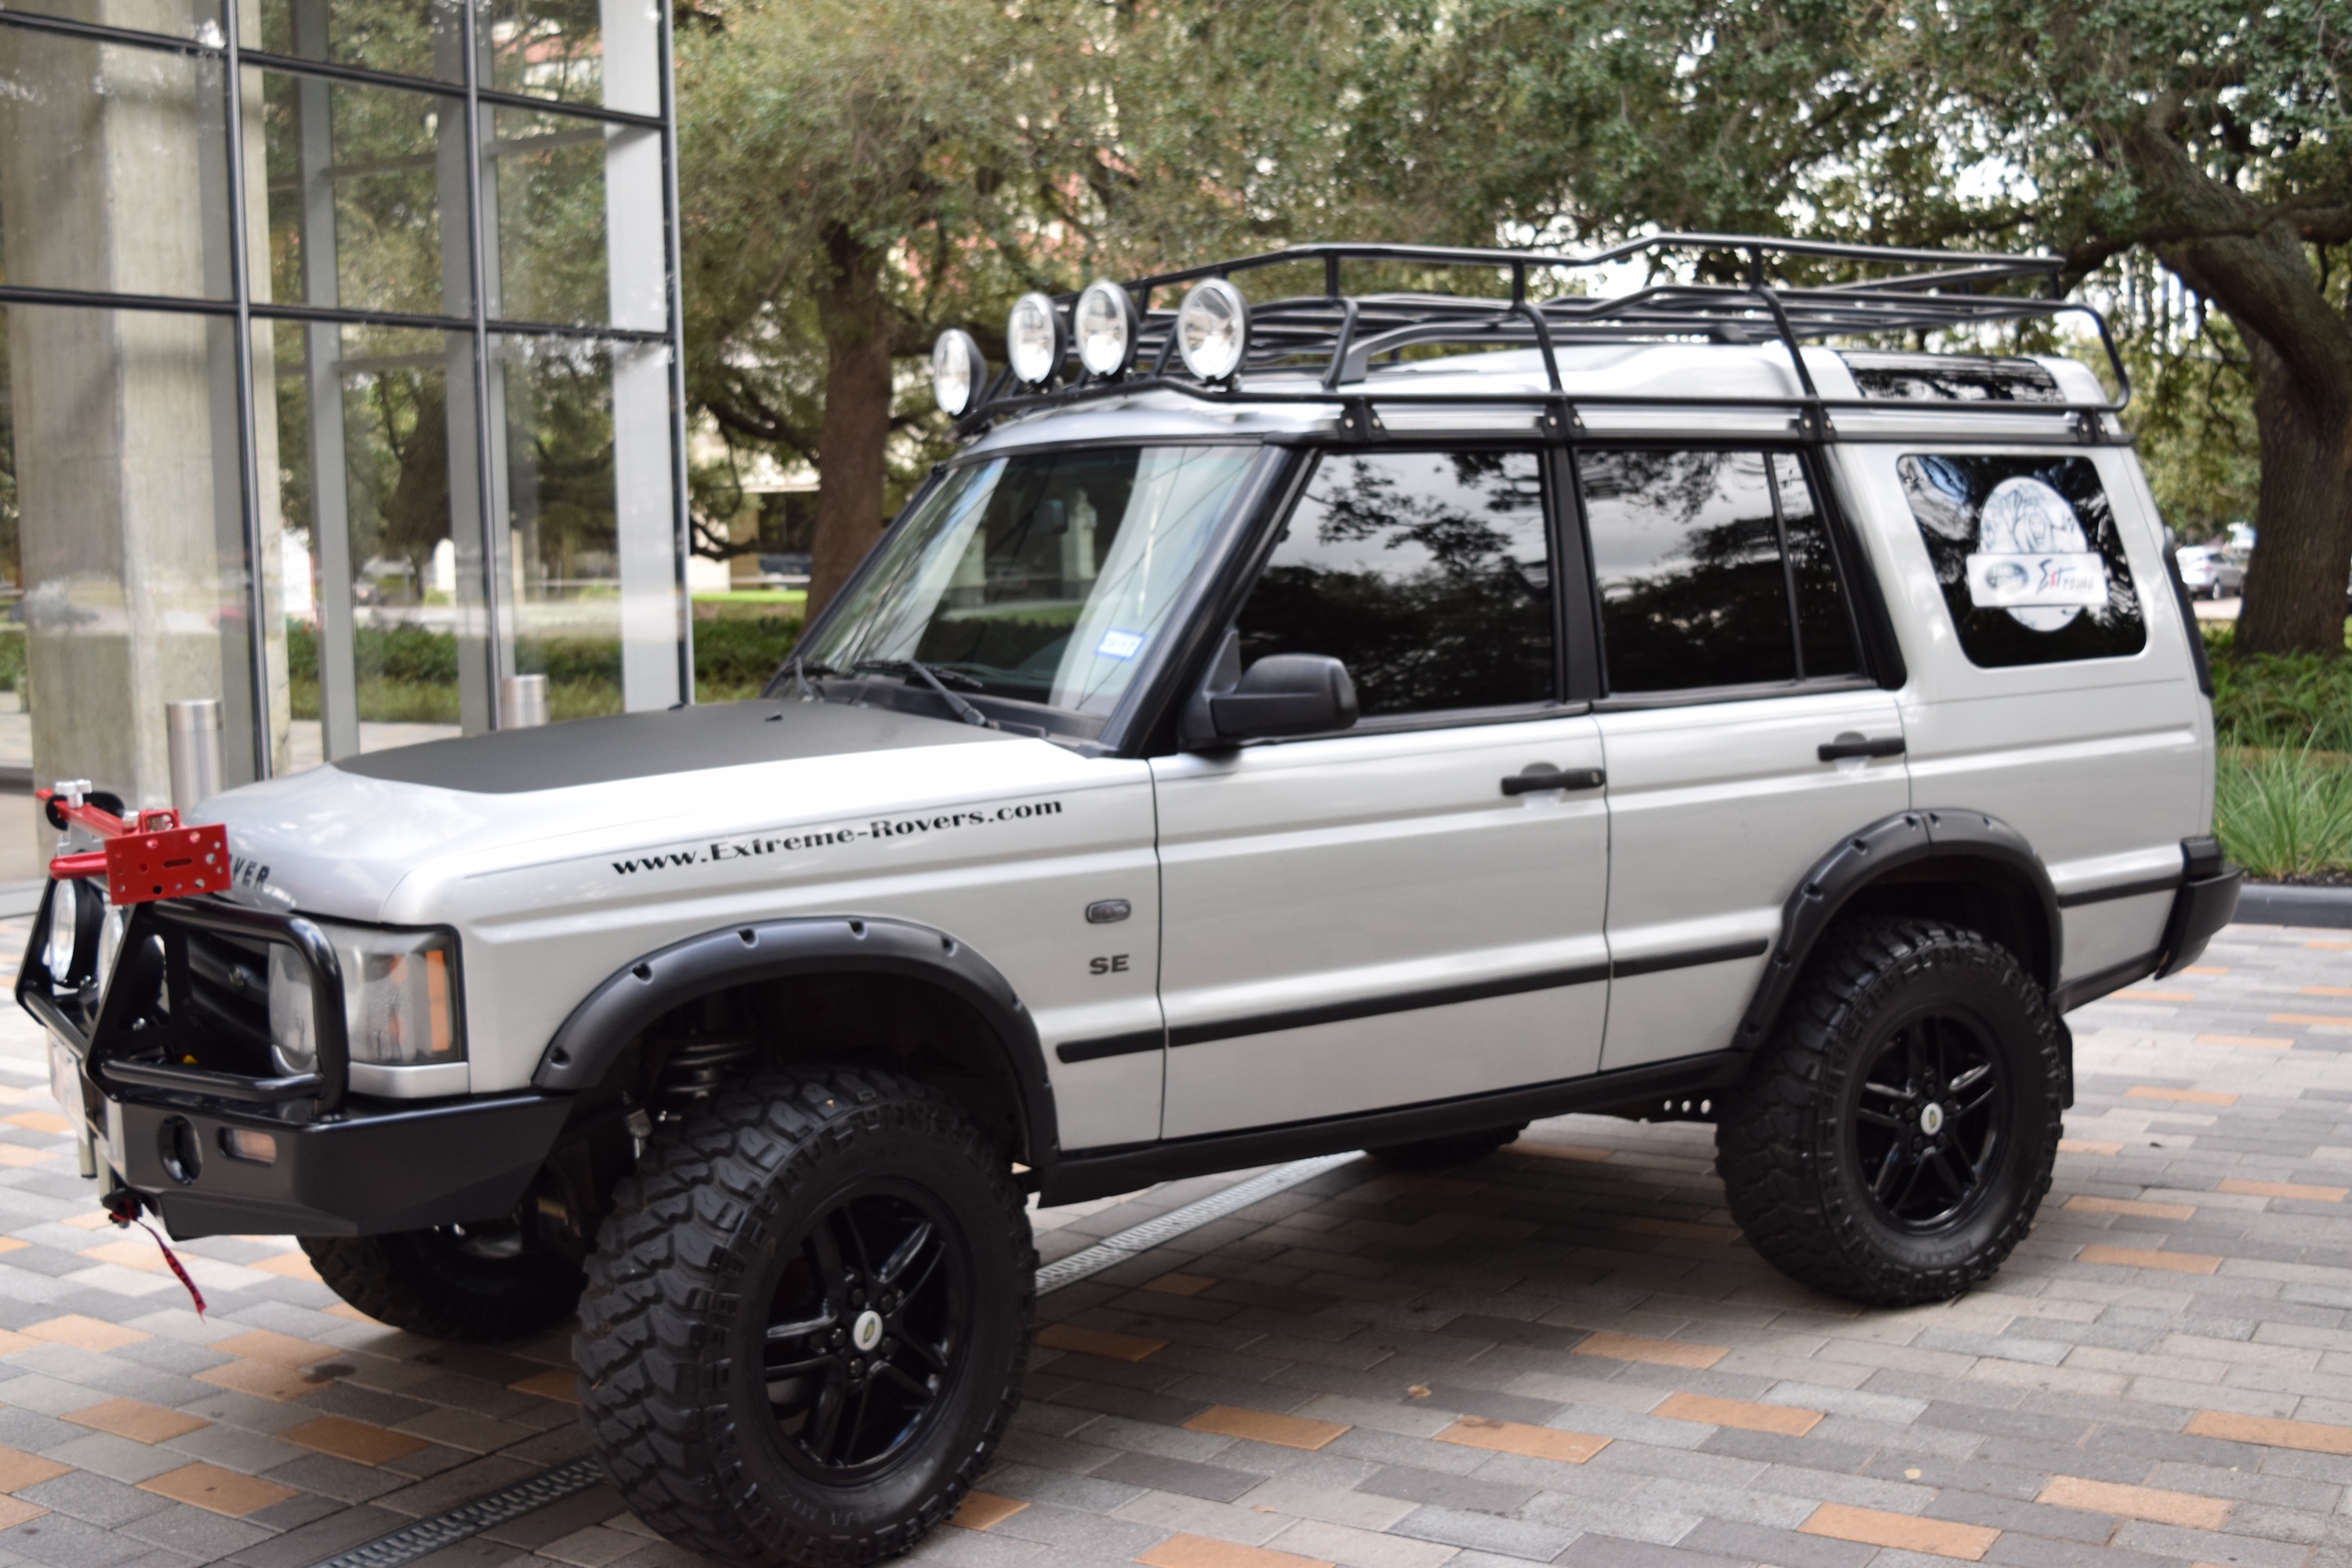 “Silver Bullet” 2003 Land Rover Discovery II SE 120k miles